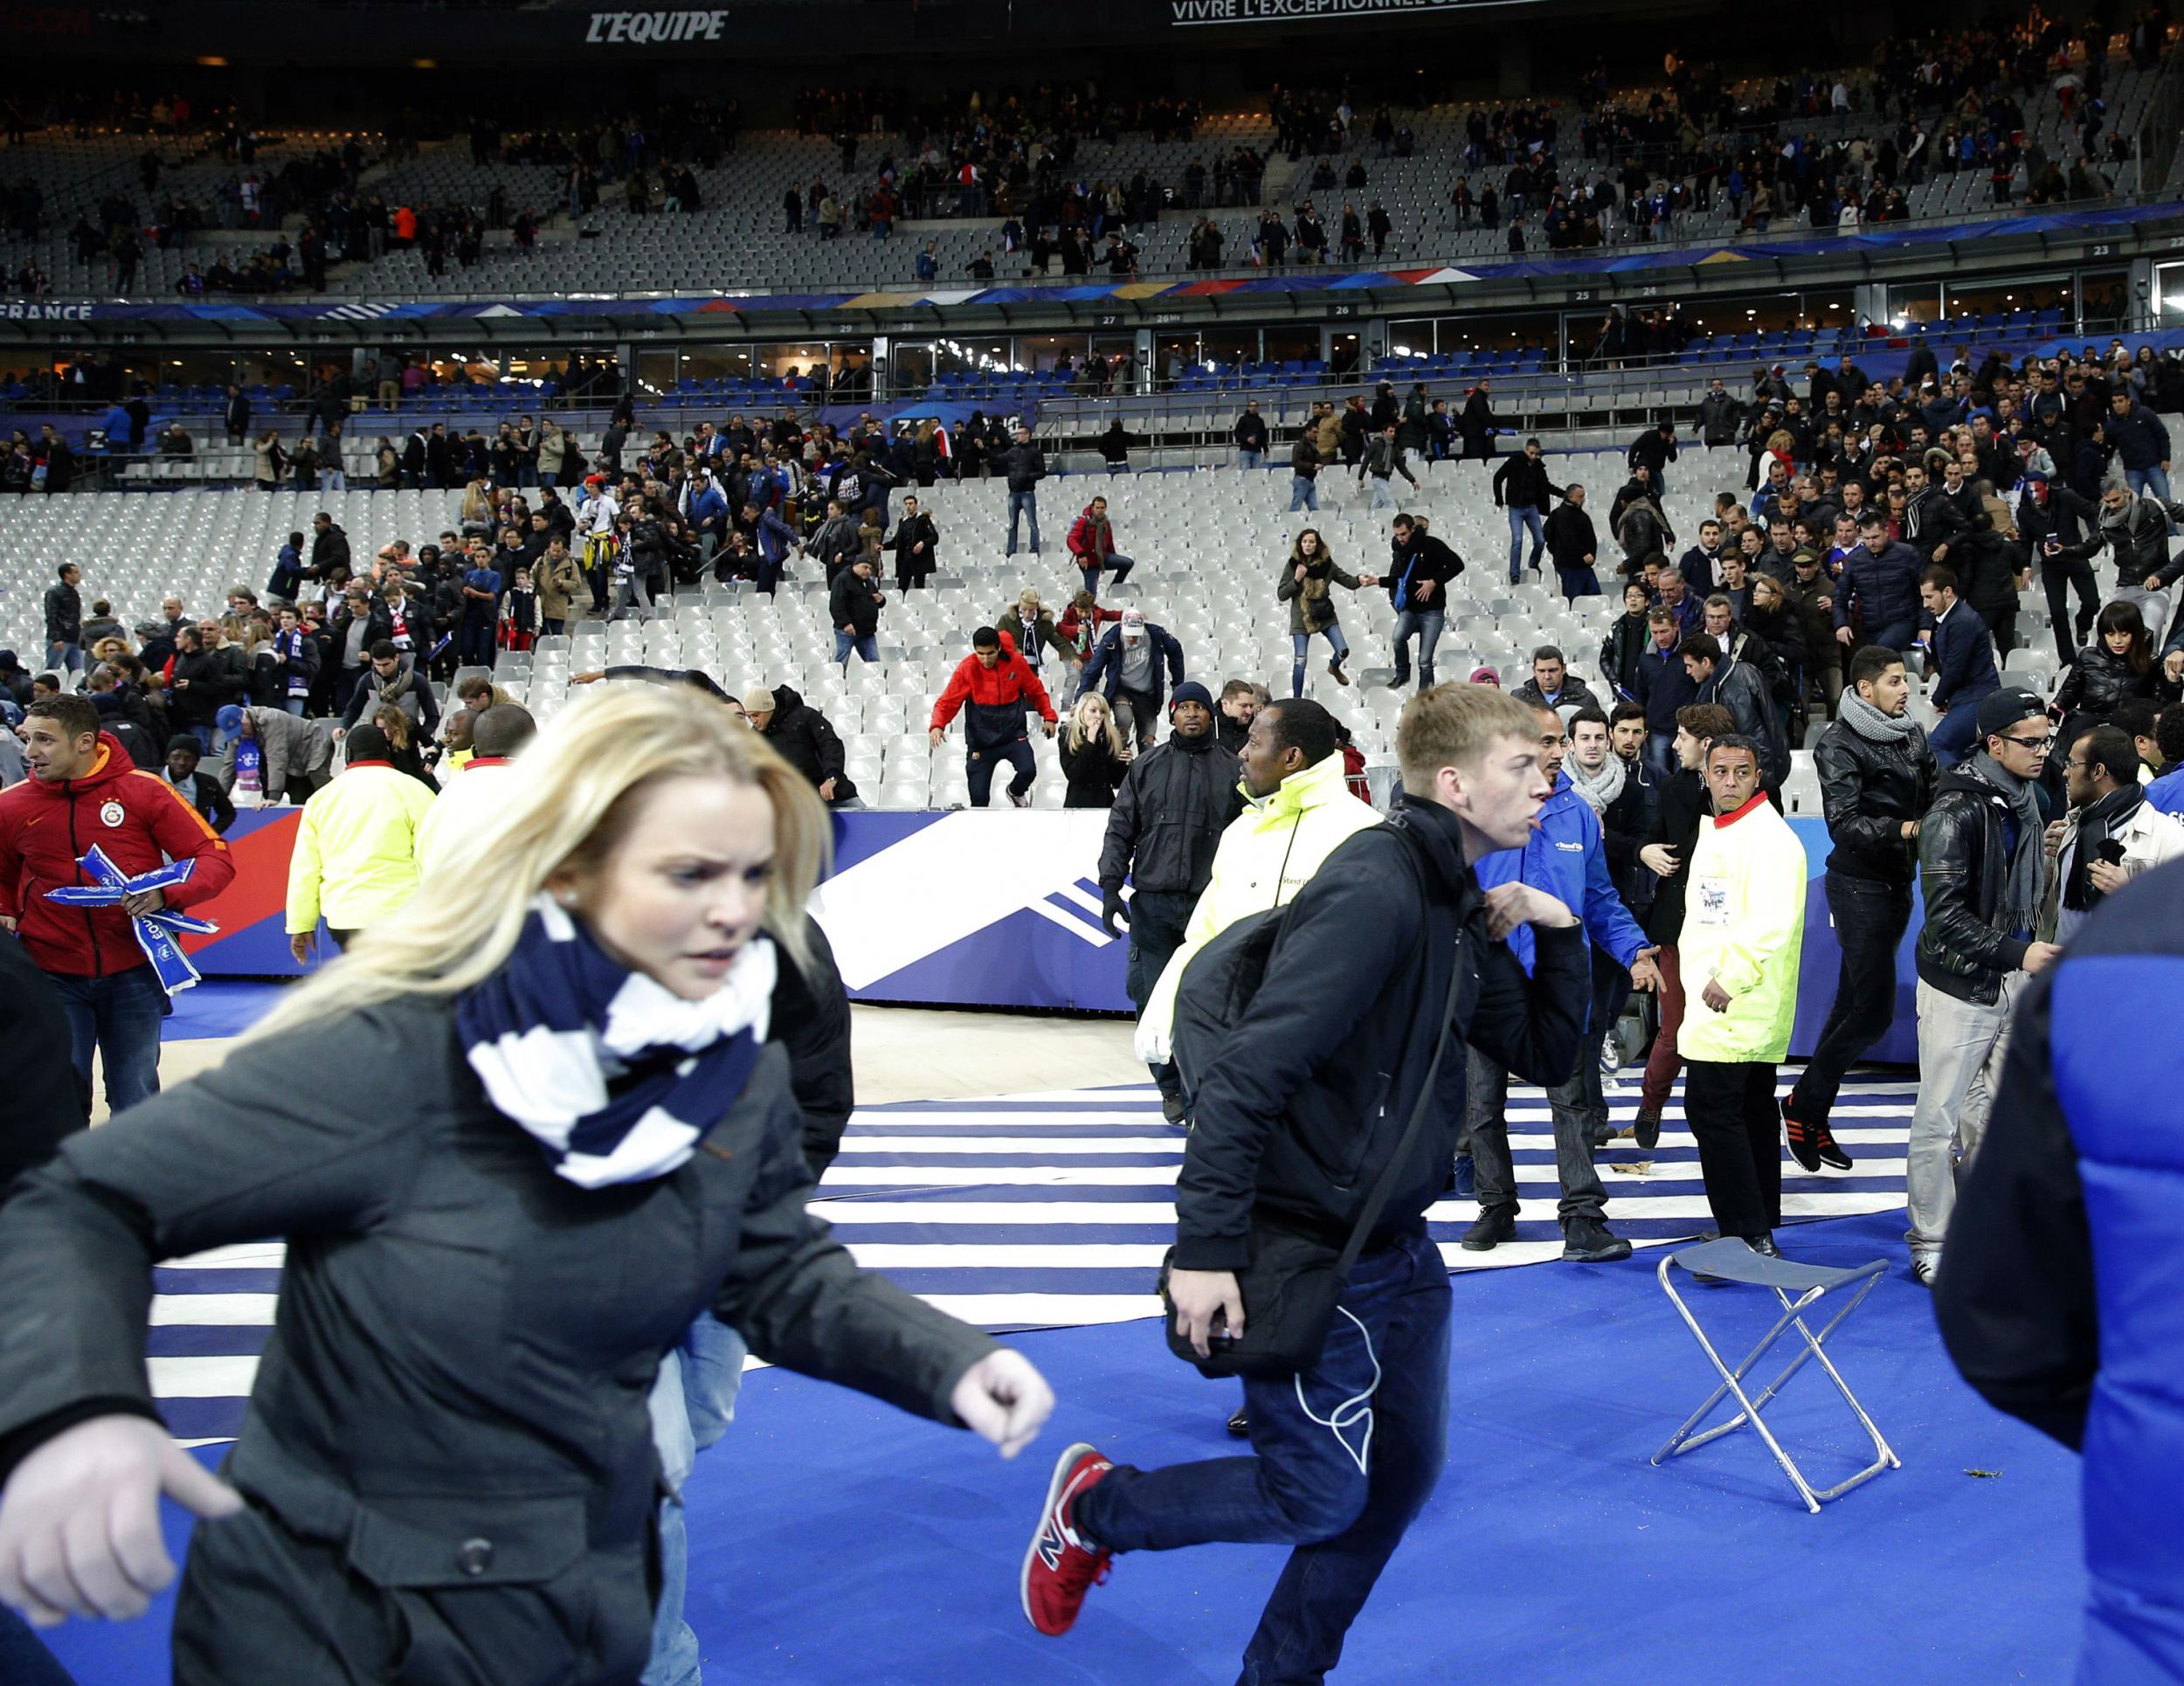 People ran in fear after attack at the Stade de France